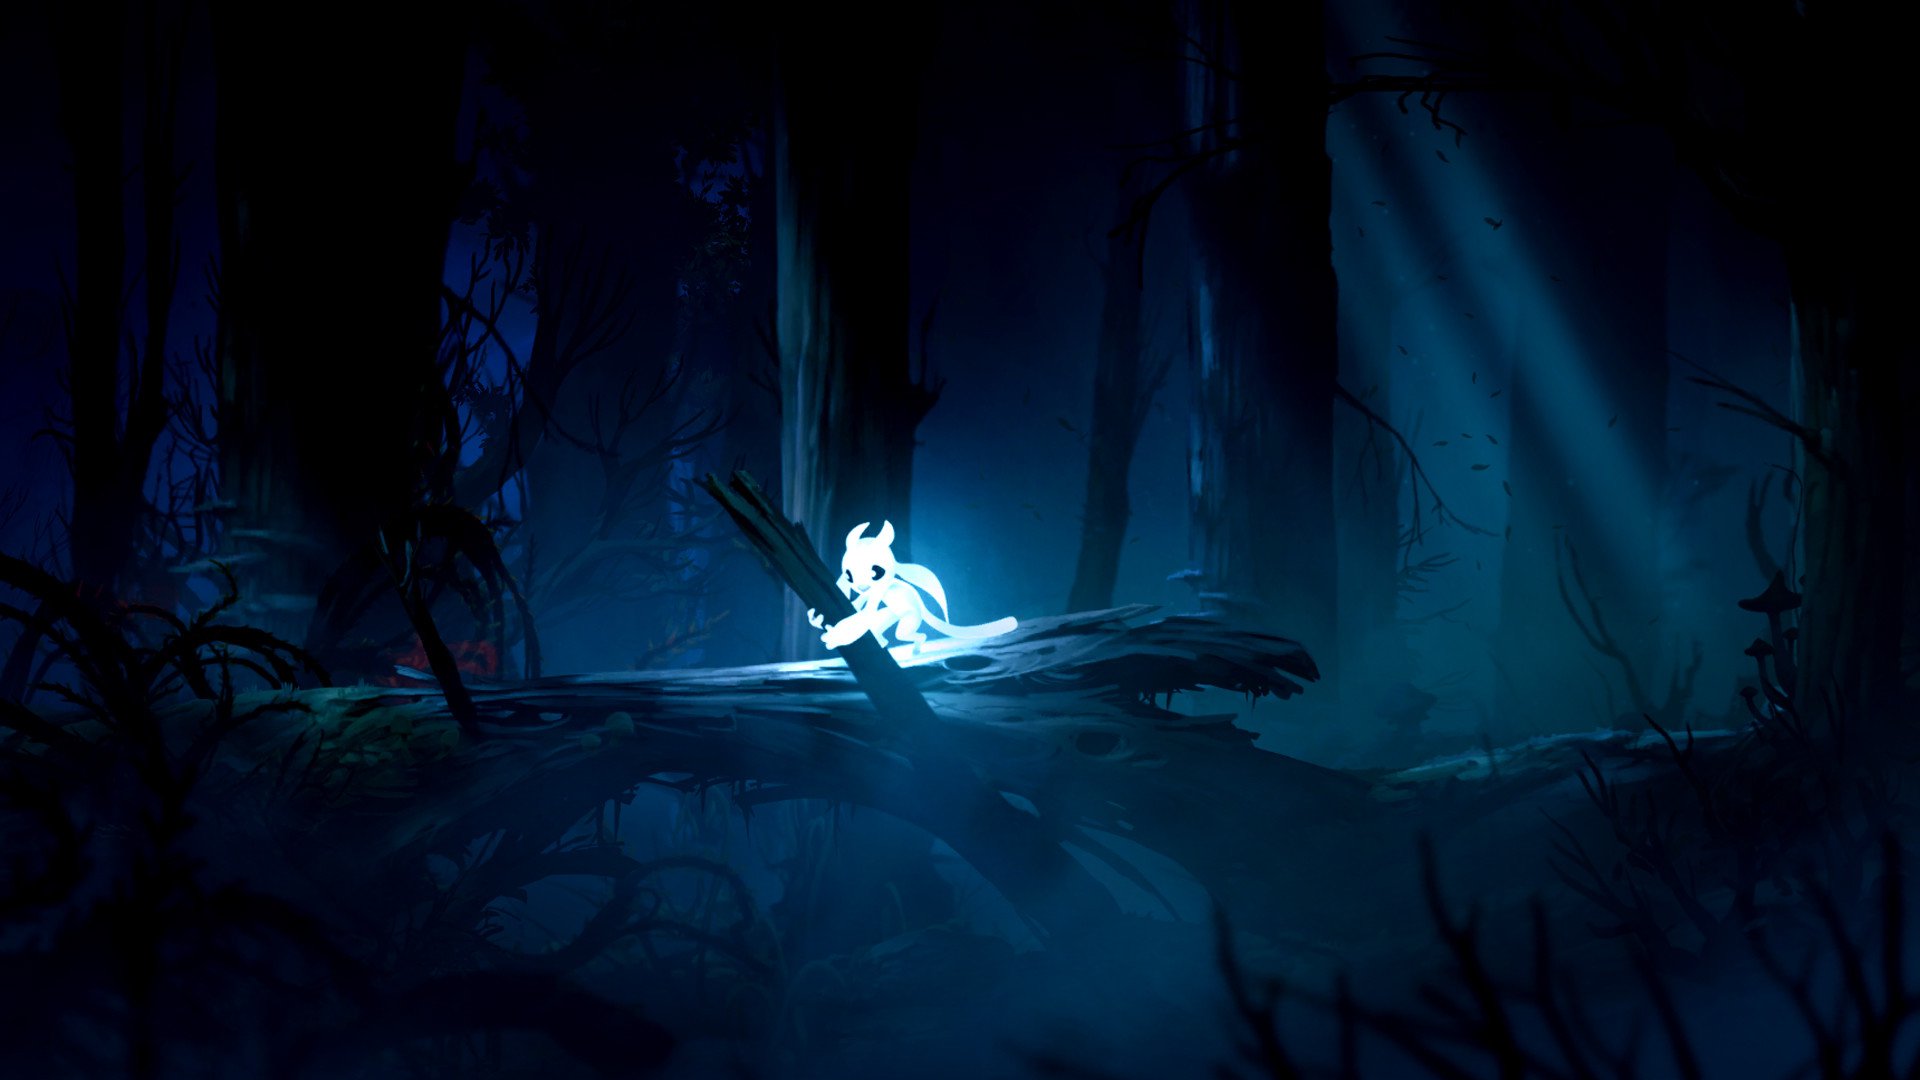 Ori and the Blind Forest Definitive Edition 1